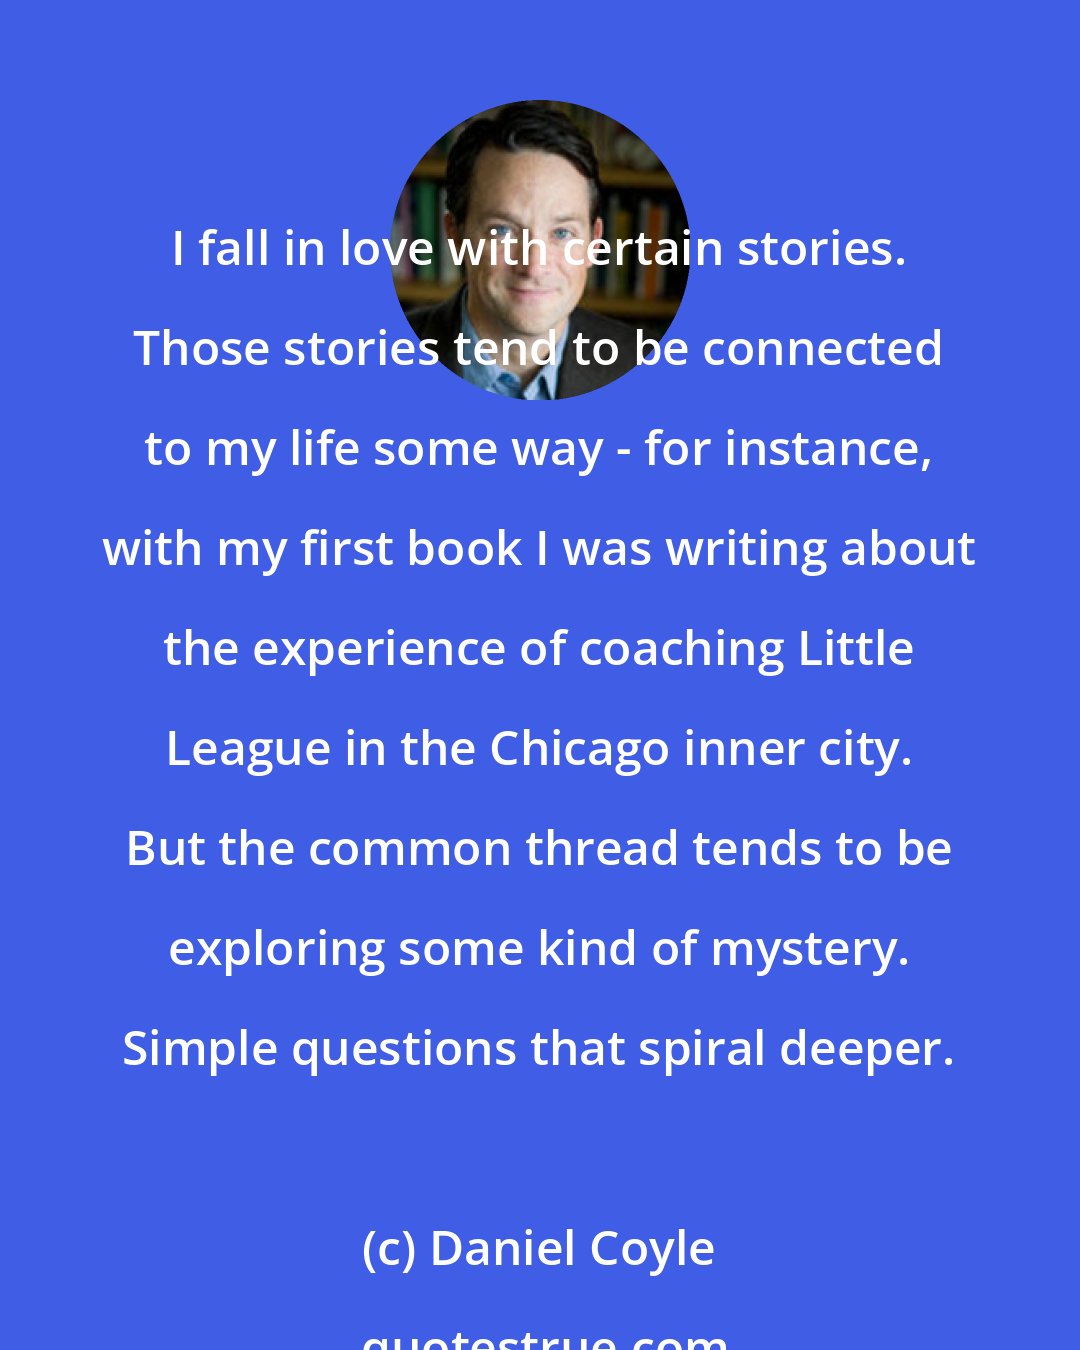 Daniel Coyle: I fall in love with certain stories. Those stories tend to be connected to my life some way - for instance, with my first book I was writing about the experience of coaching Little League in the Chicago inner city. But the common thread tends to be exploring some kind of mystery. Simple questions that spiral deeper.